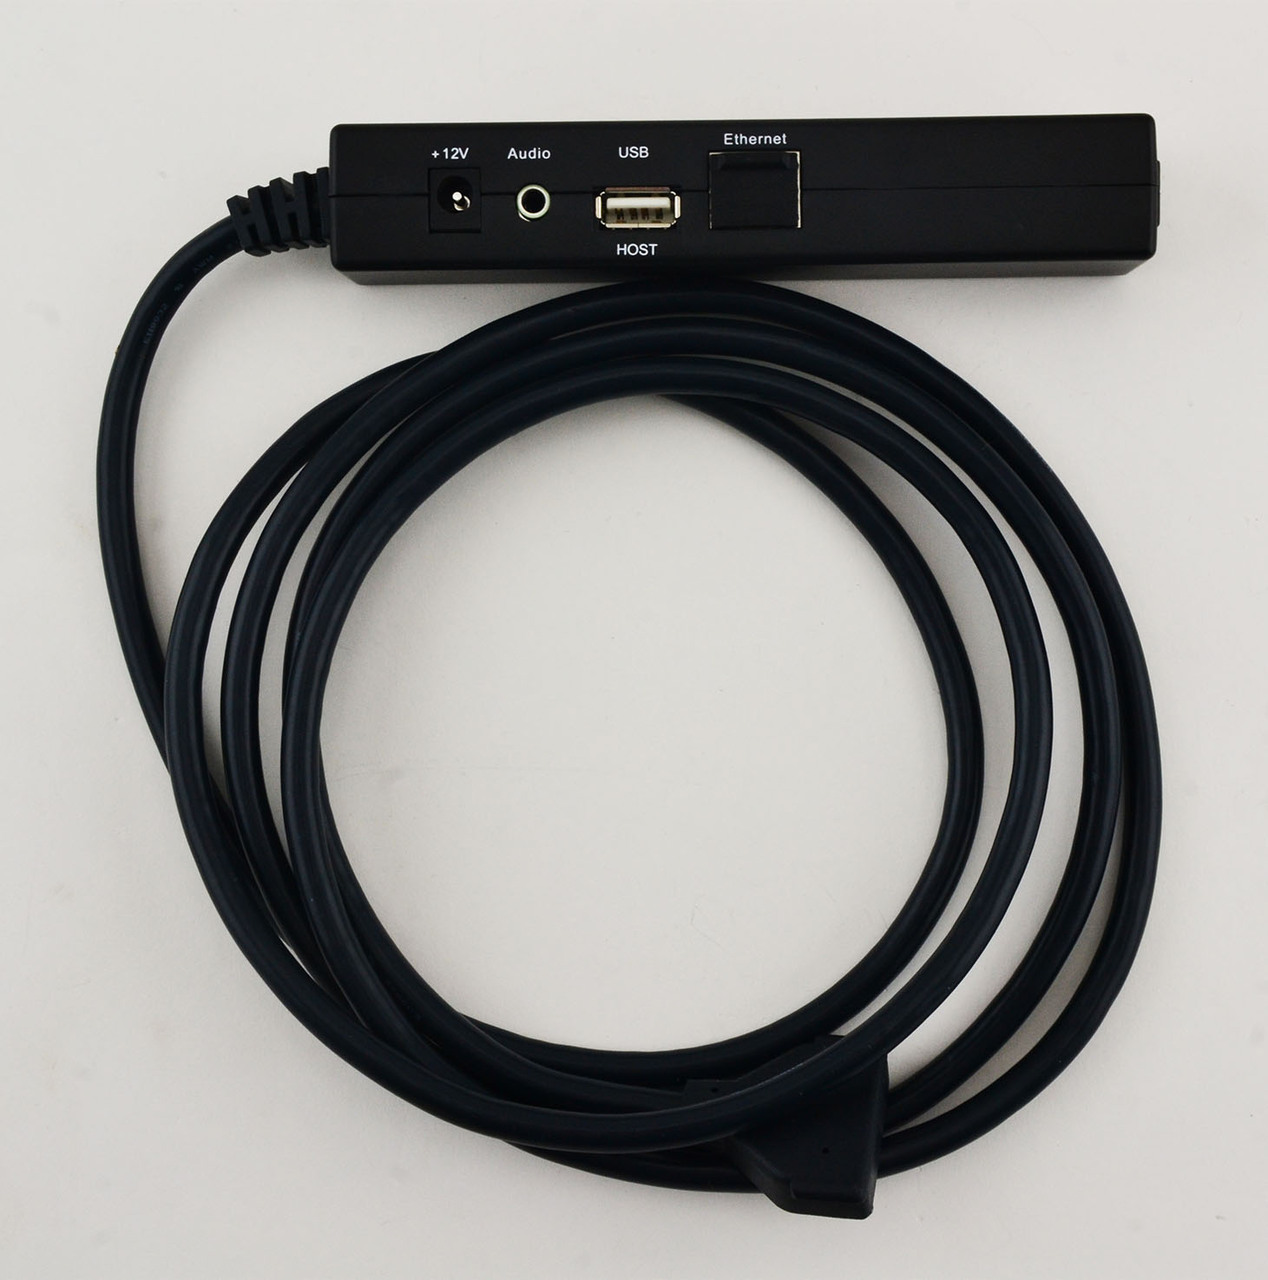 MX915 PIN PAD CABLE, Fits Verifone Image